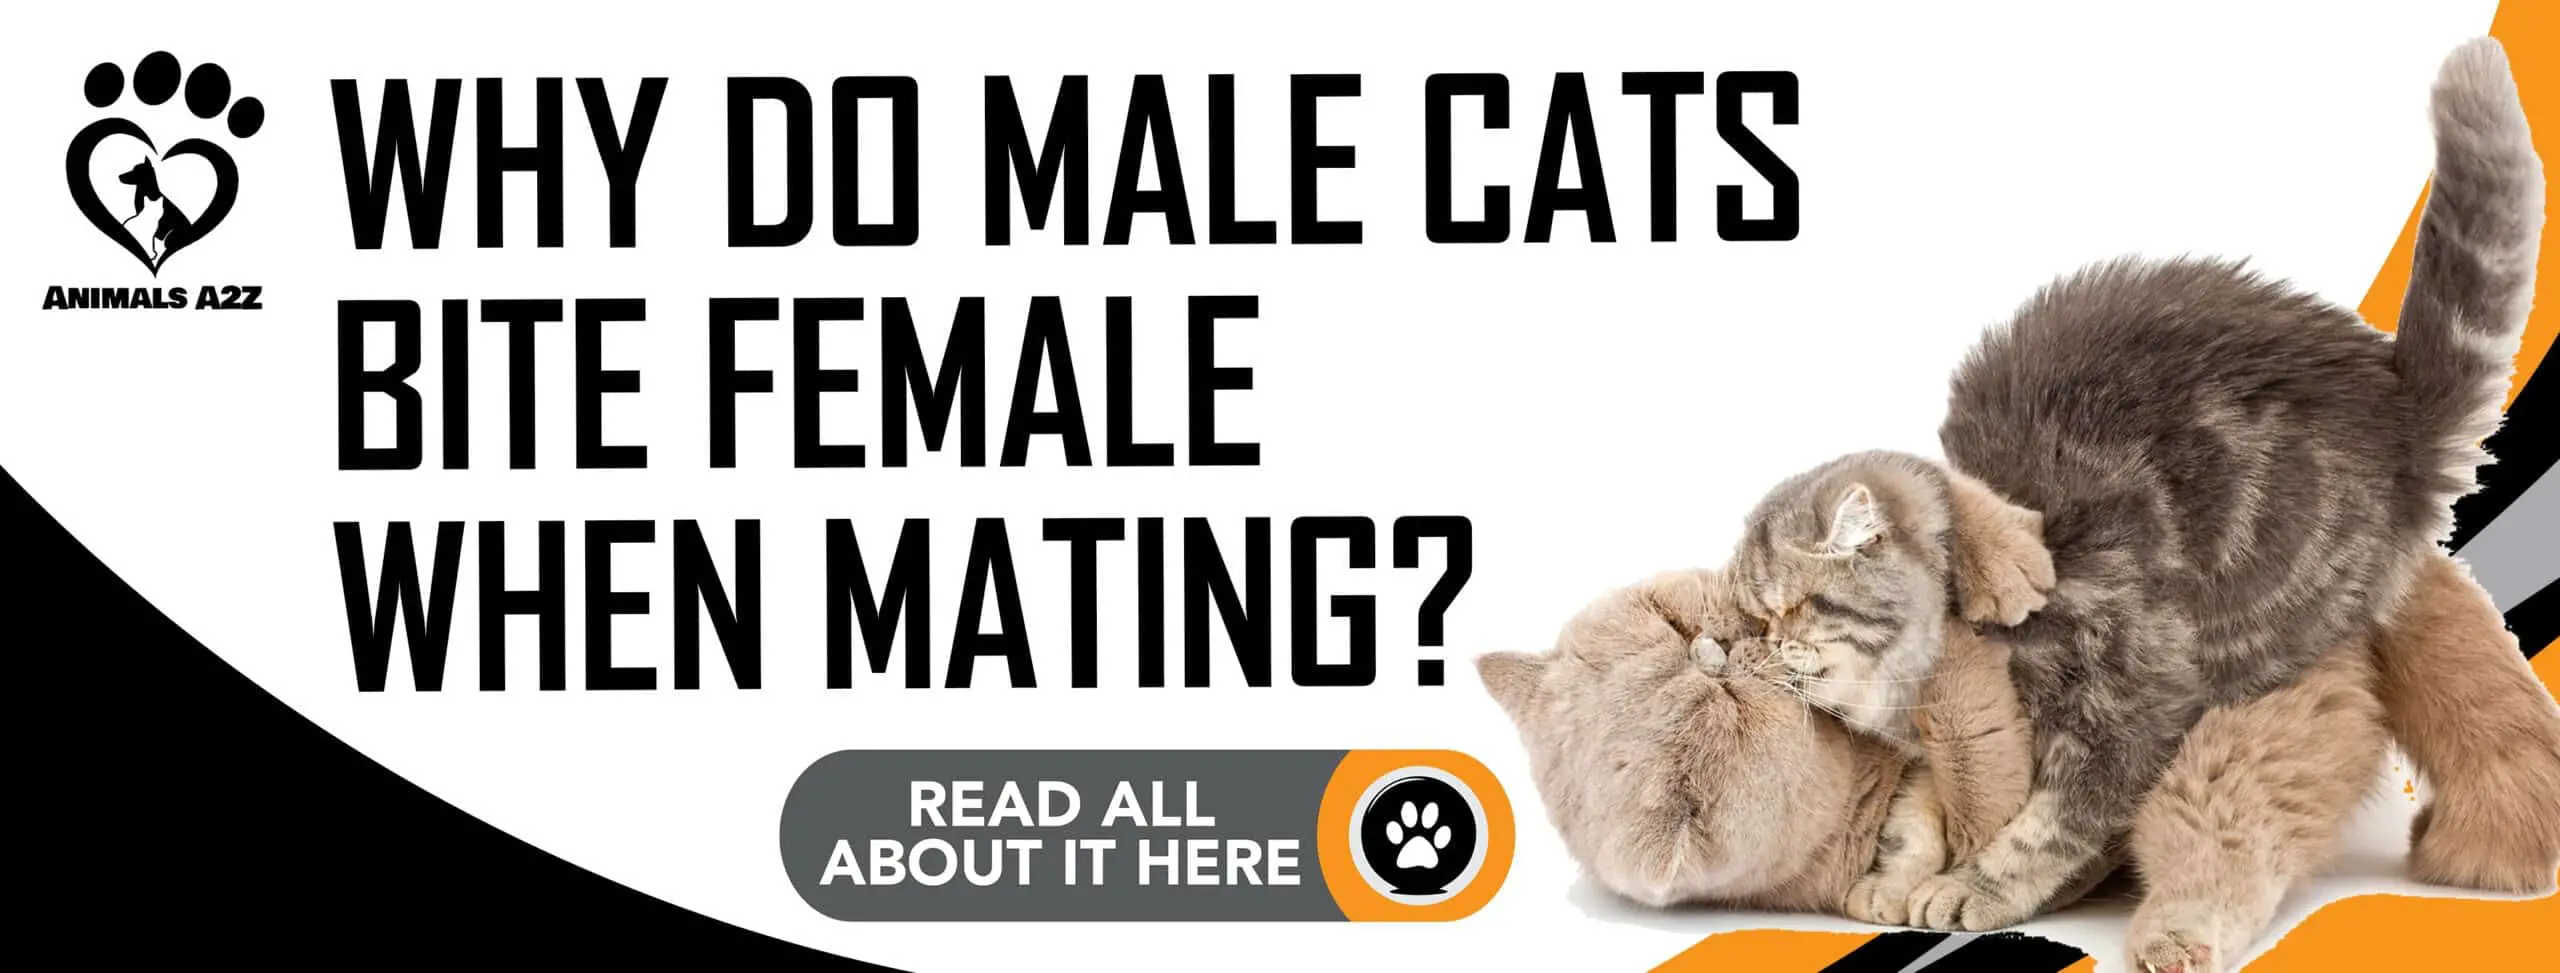 Why do male cats bite female when mating